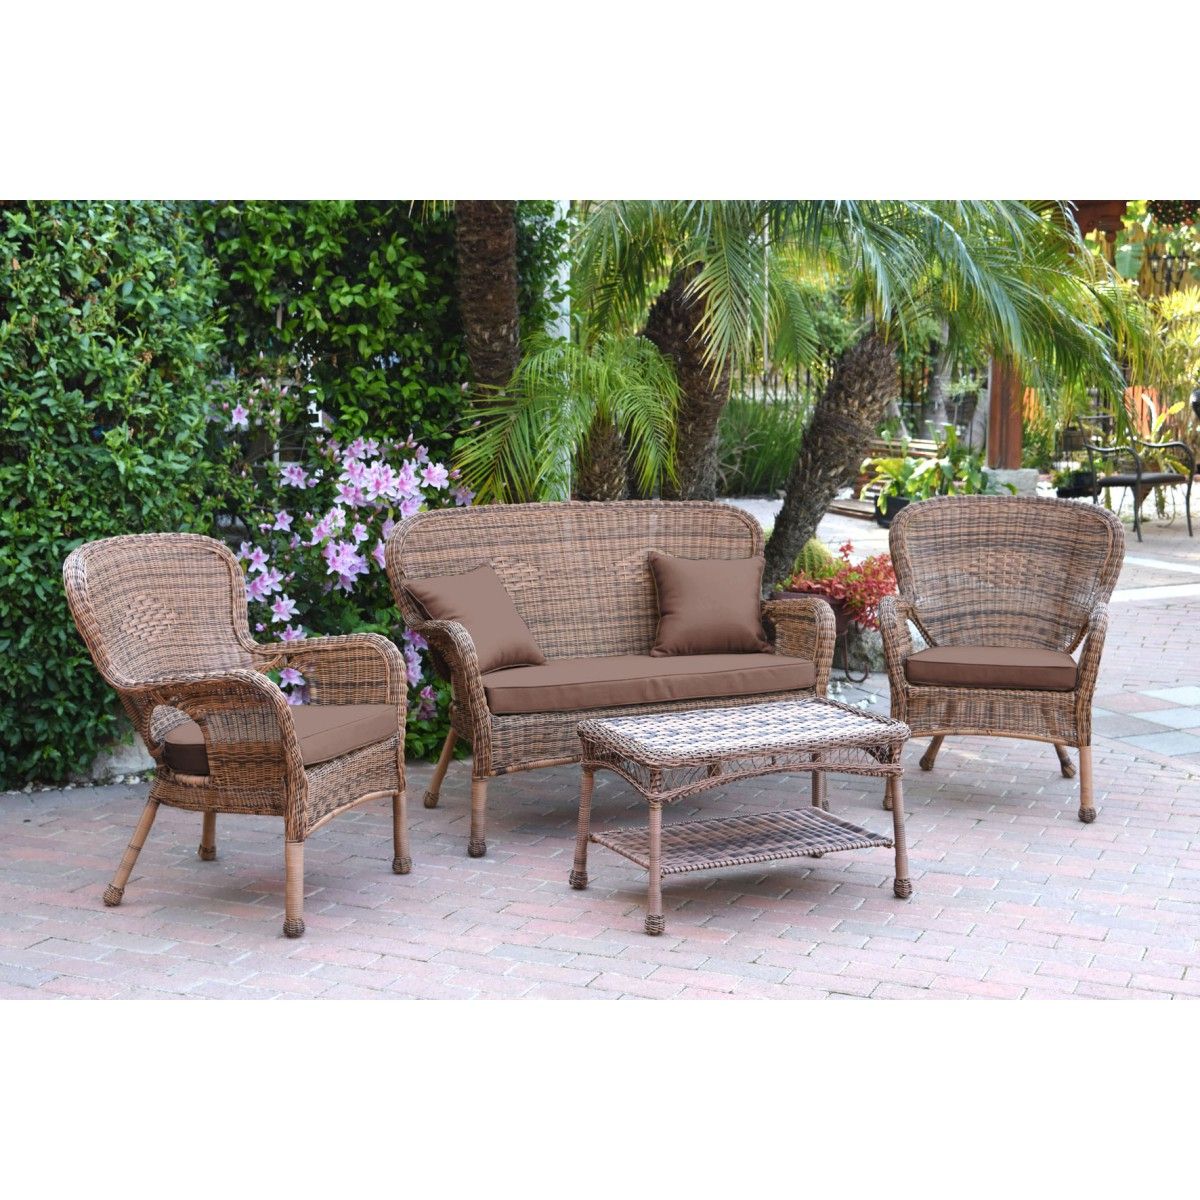 Popular 4pc Windsor Honey Wicker Conversation Set – Brown Cushions Intended For Brown Patio Conversation Sets With Cushions (View 6 of 15)